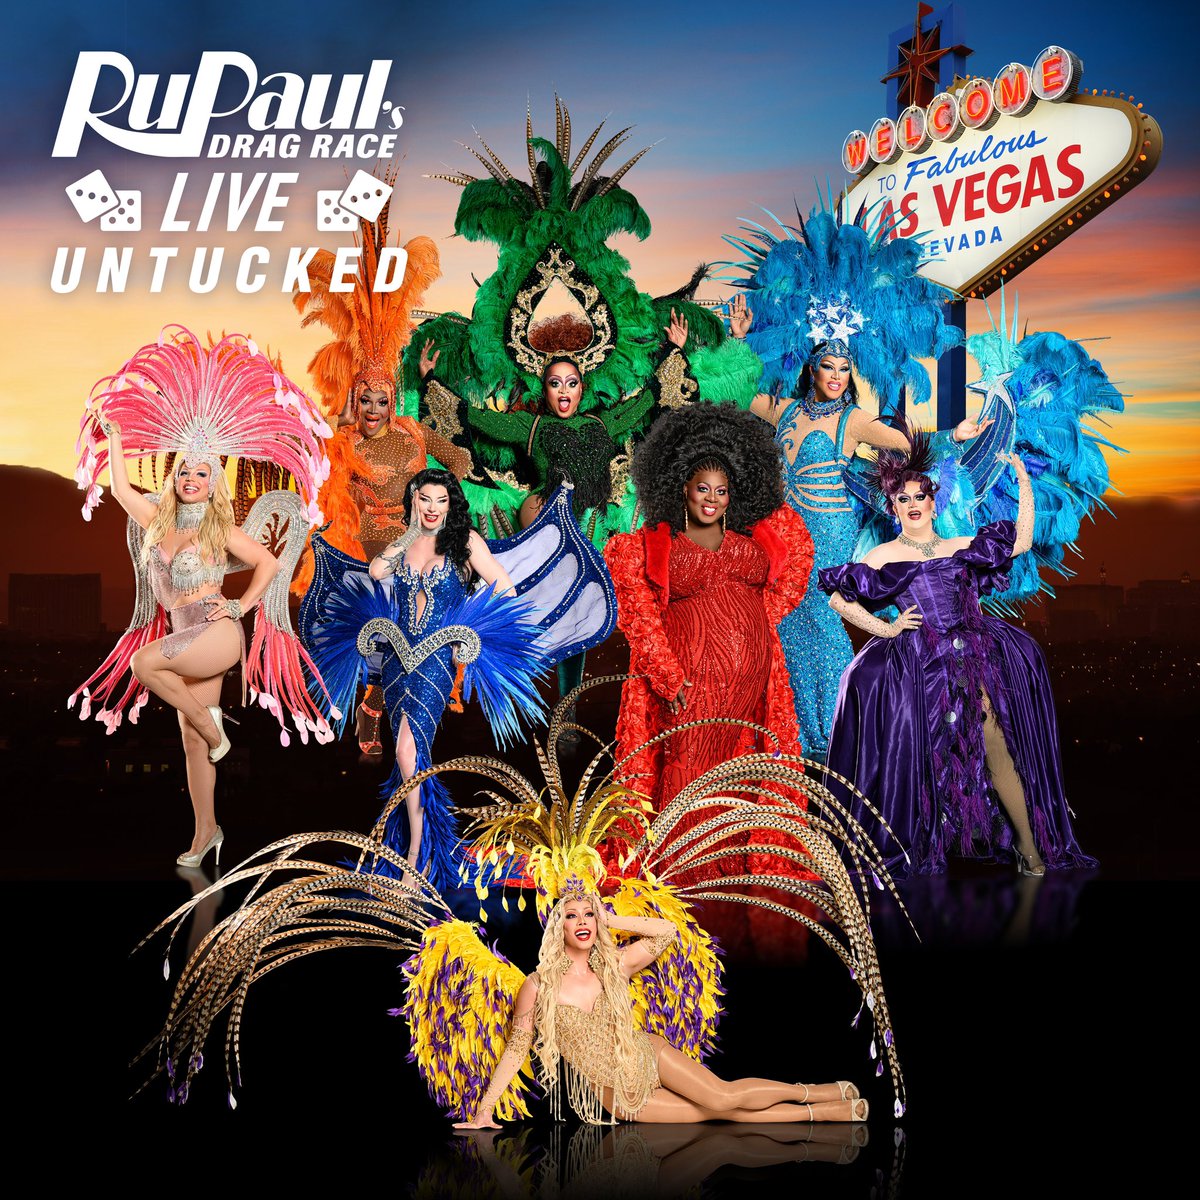 Welcome to Vegas, baby! 🎲 Our new series @rupaulsdragracelive: UNTUCKED captures what really happens behind the curtain of the hottest show on the Las Vegas Strip 👠 You don't want to miss out! Premieres April 17 only on @wowpresentsplus ￼ bit.ly/3BYrrSP